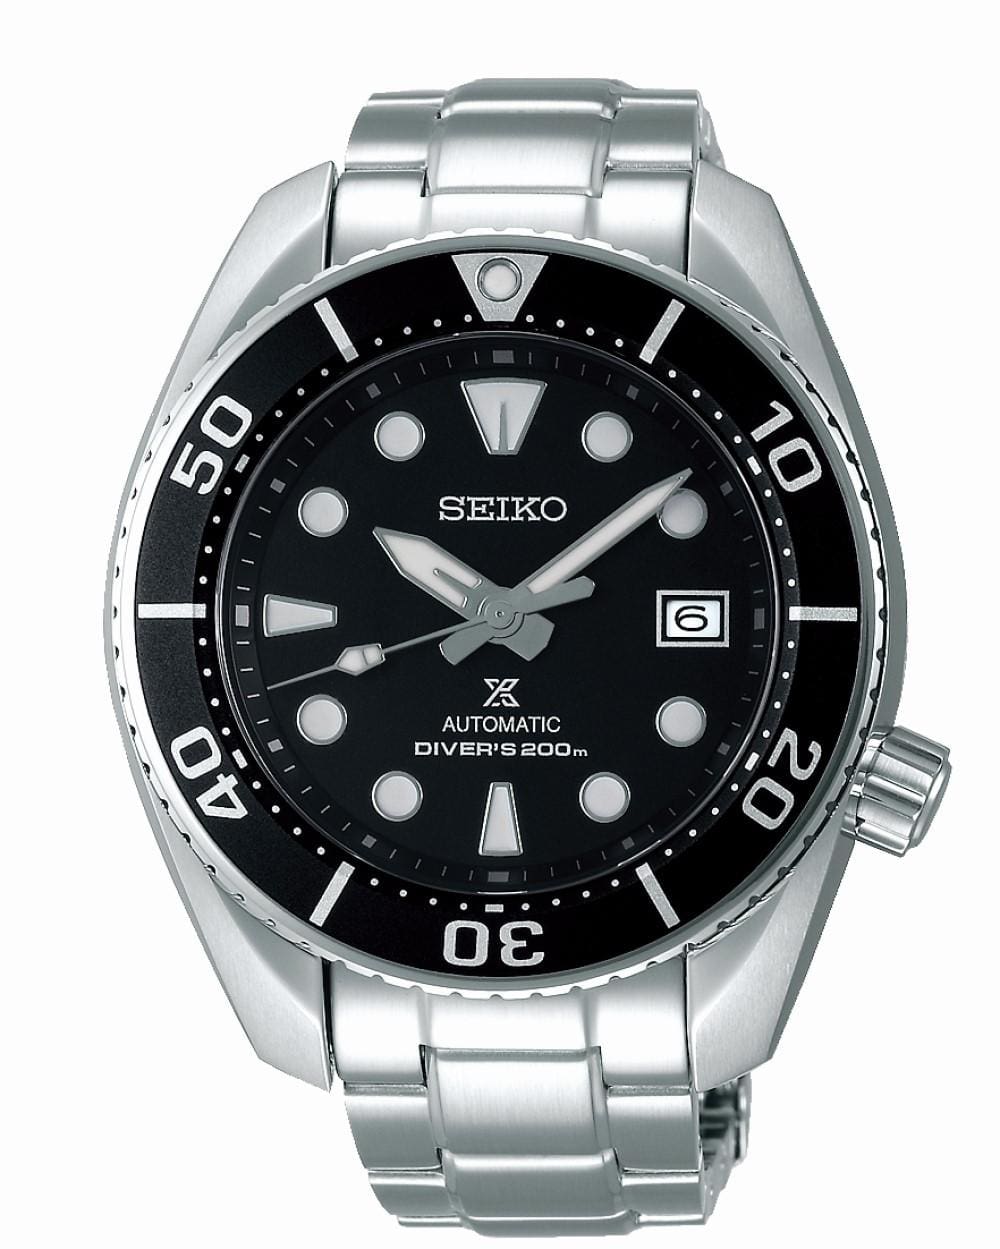 “Watch & Act!” Auction Item – Lot 10: Dive into the world of Seiko Prospex